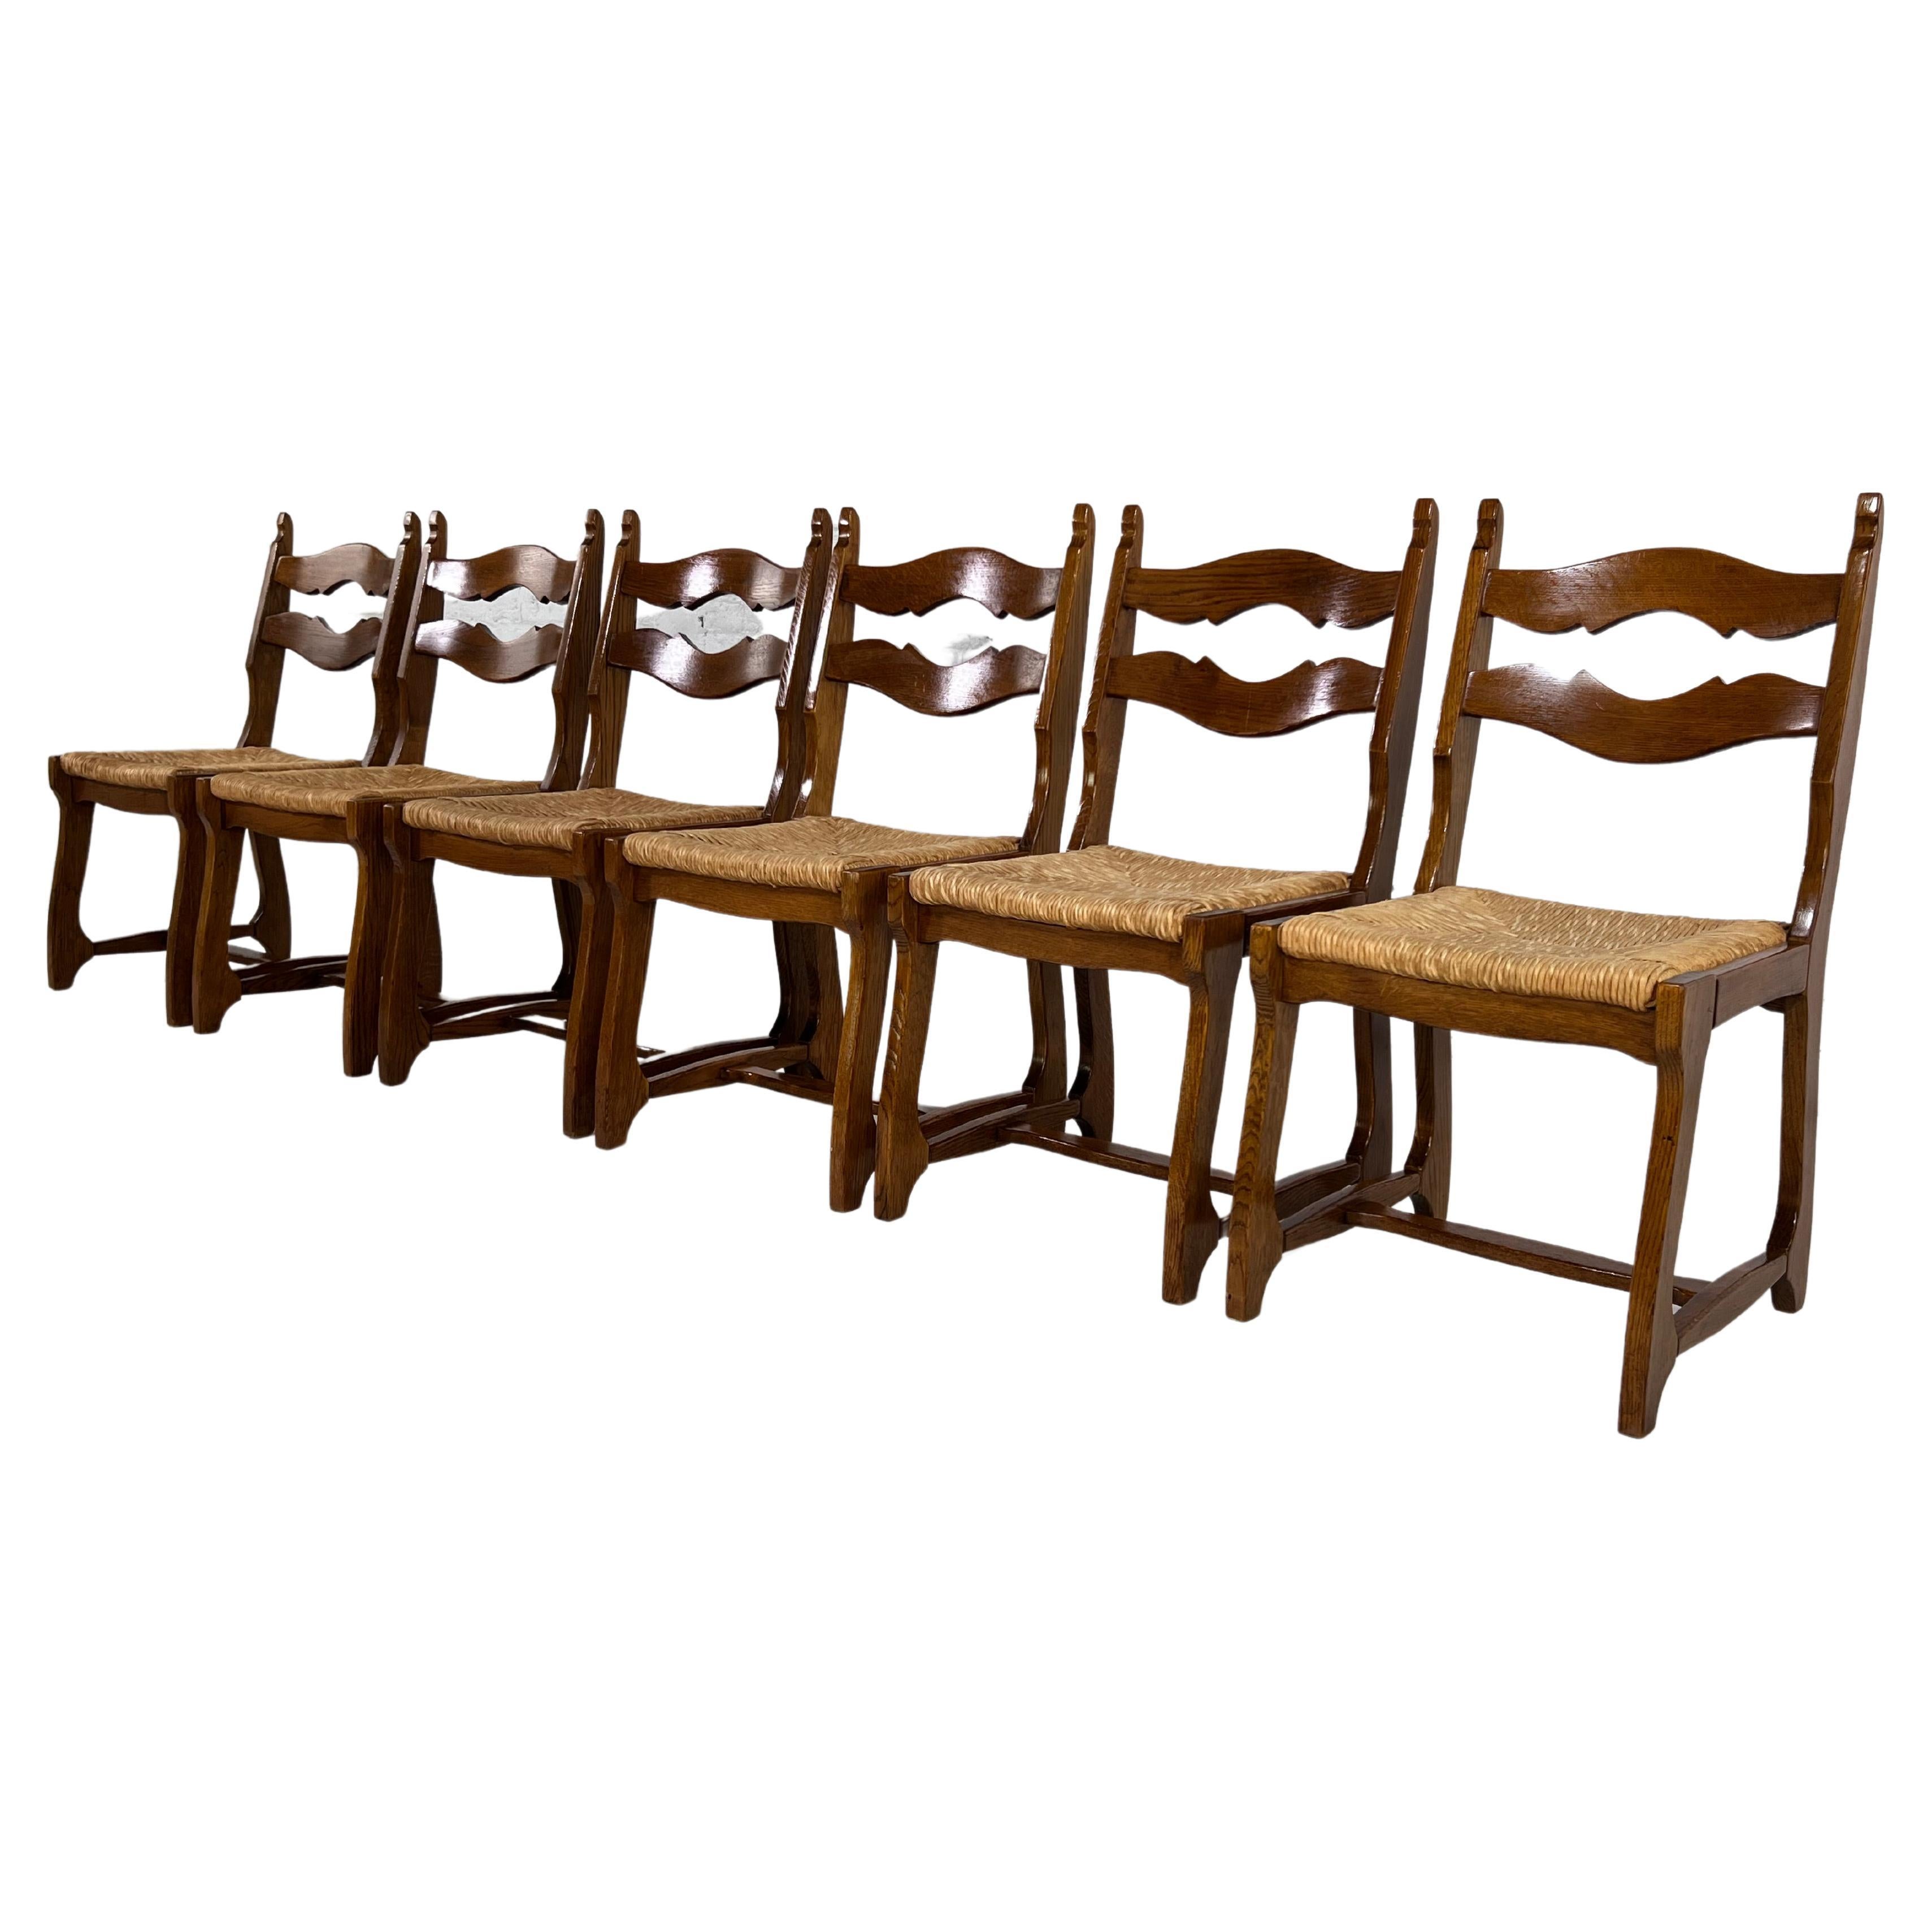 1950s Design Oak Wooden And Braided Straw Seats Set of 6 Chairs